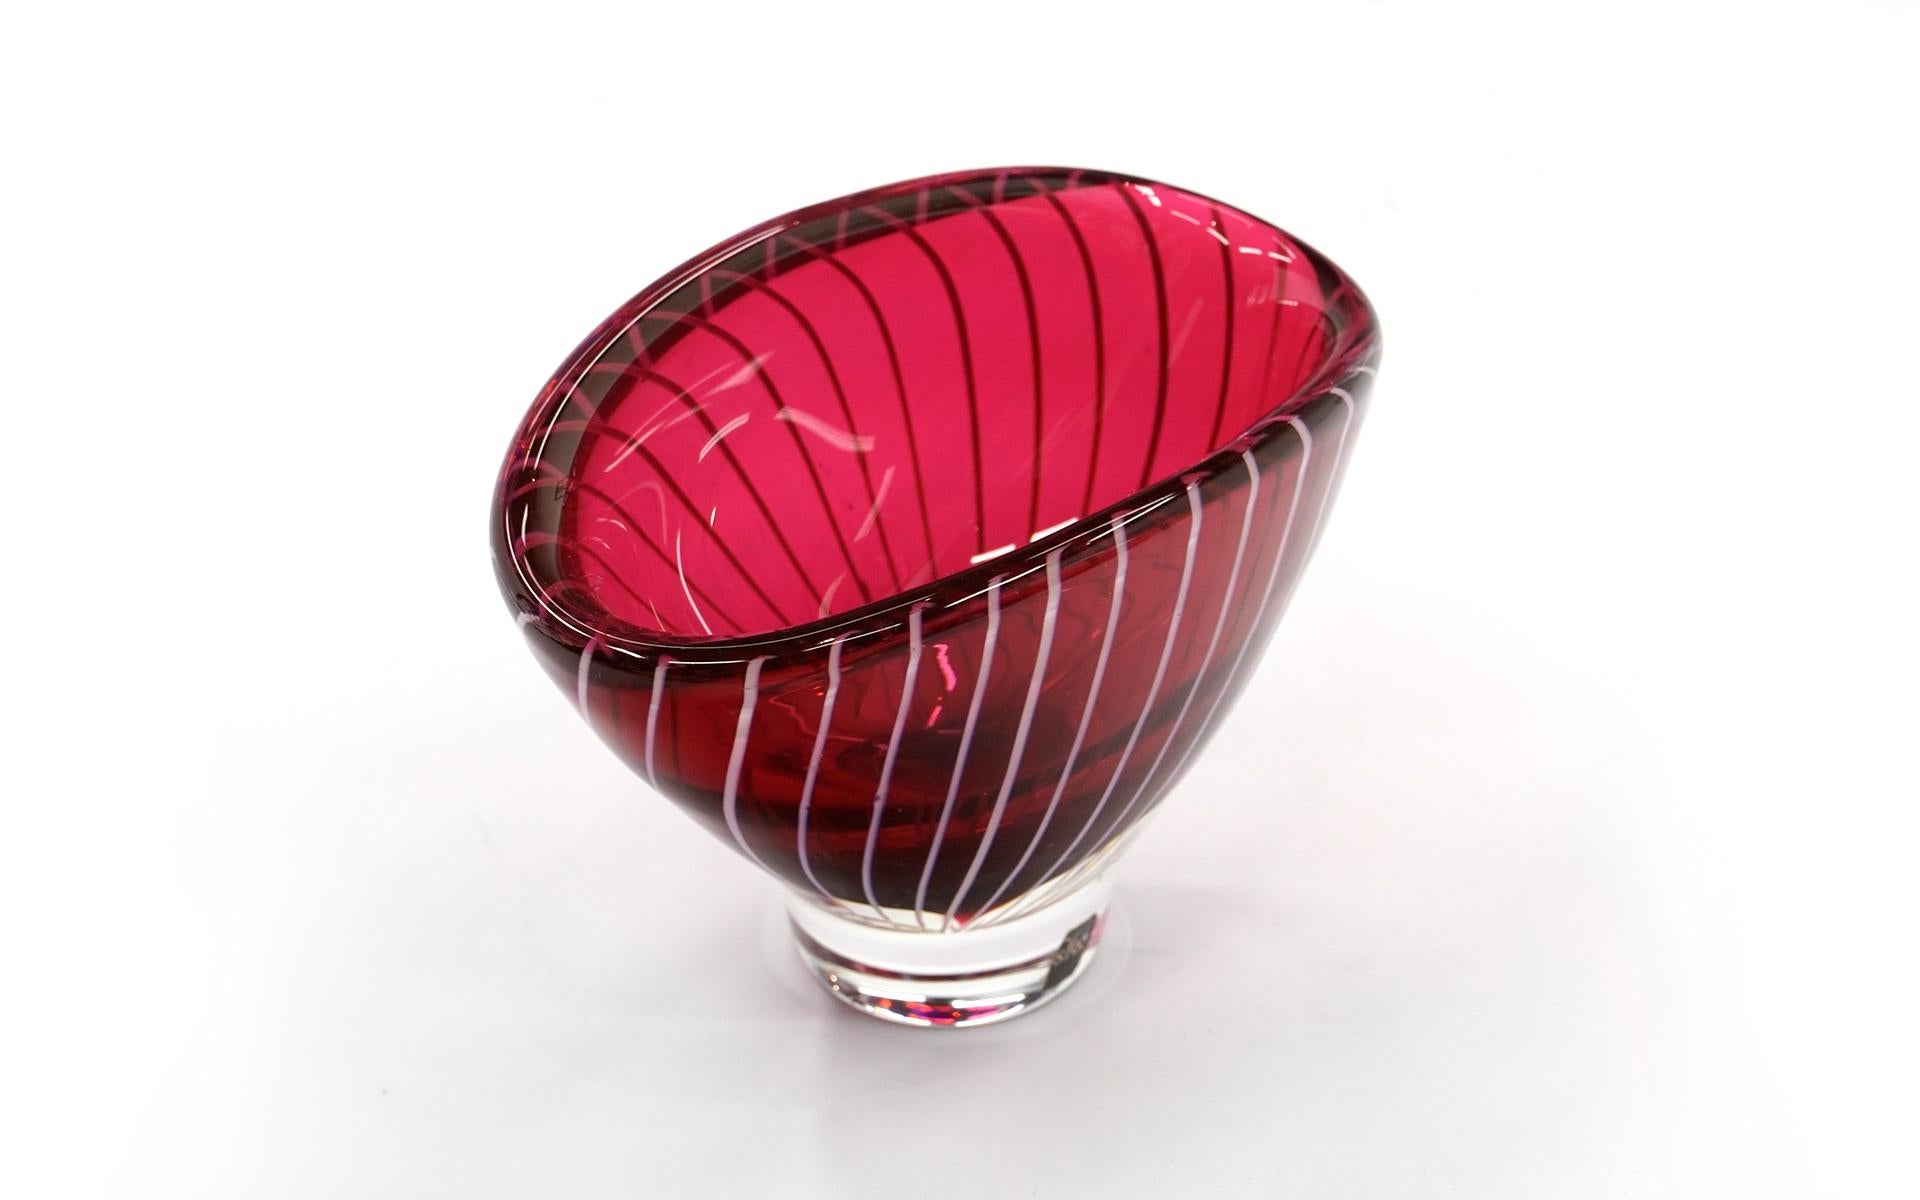 Swedish Mid-Century Modern cranberry and white striped glass bowl by Swedish glass artist Vicke Lindstrand for Kosta Boda circa 1950. No chips cracks or repairs.

This particular piece is a rare work from the Zebra series, with the encased ribbons